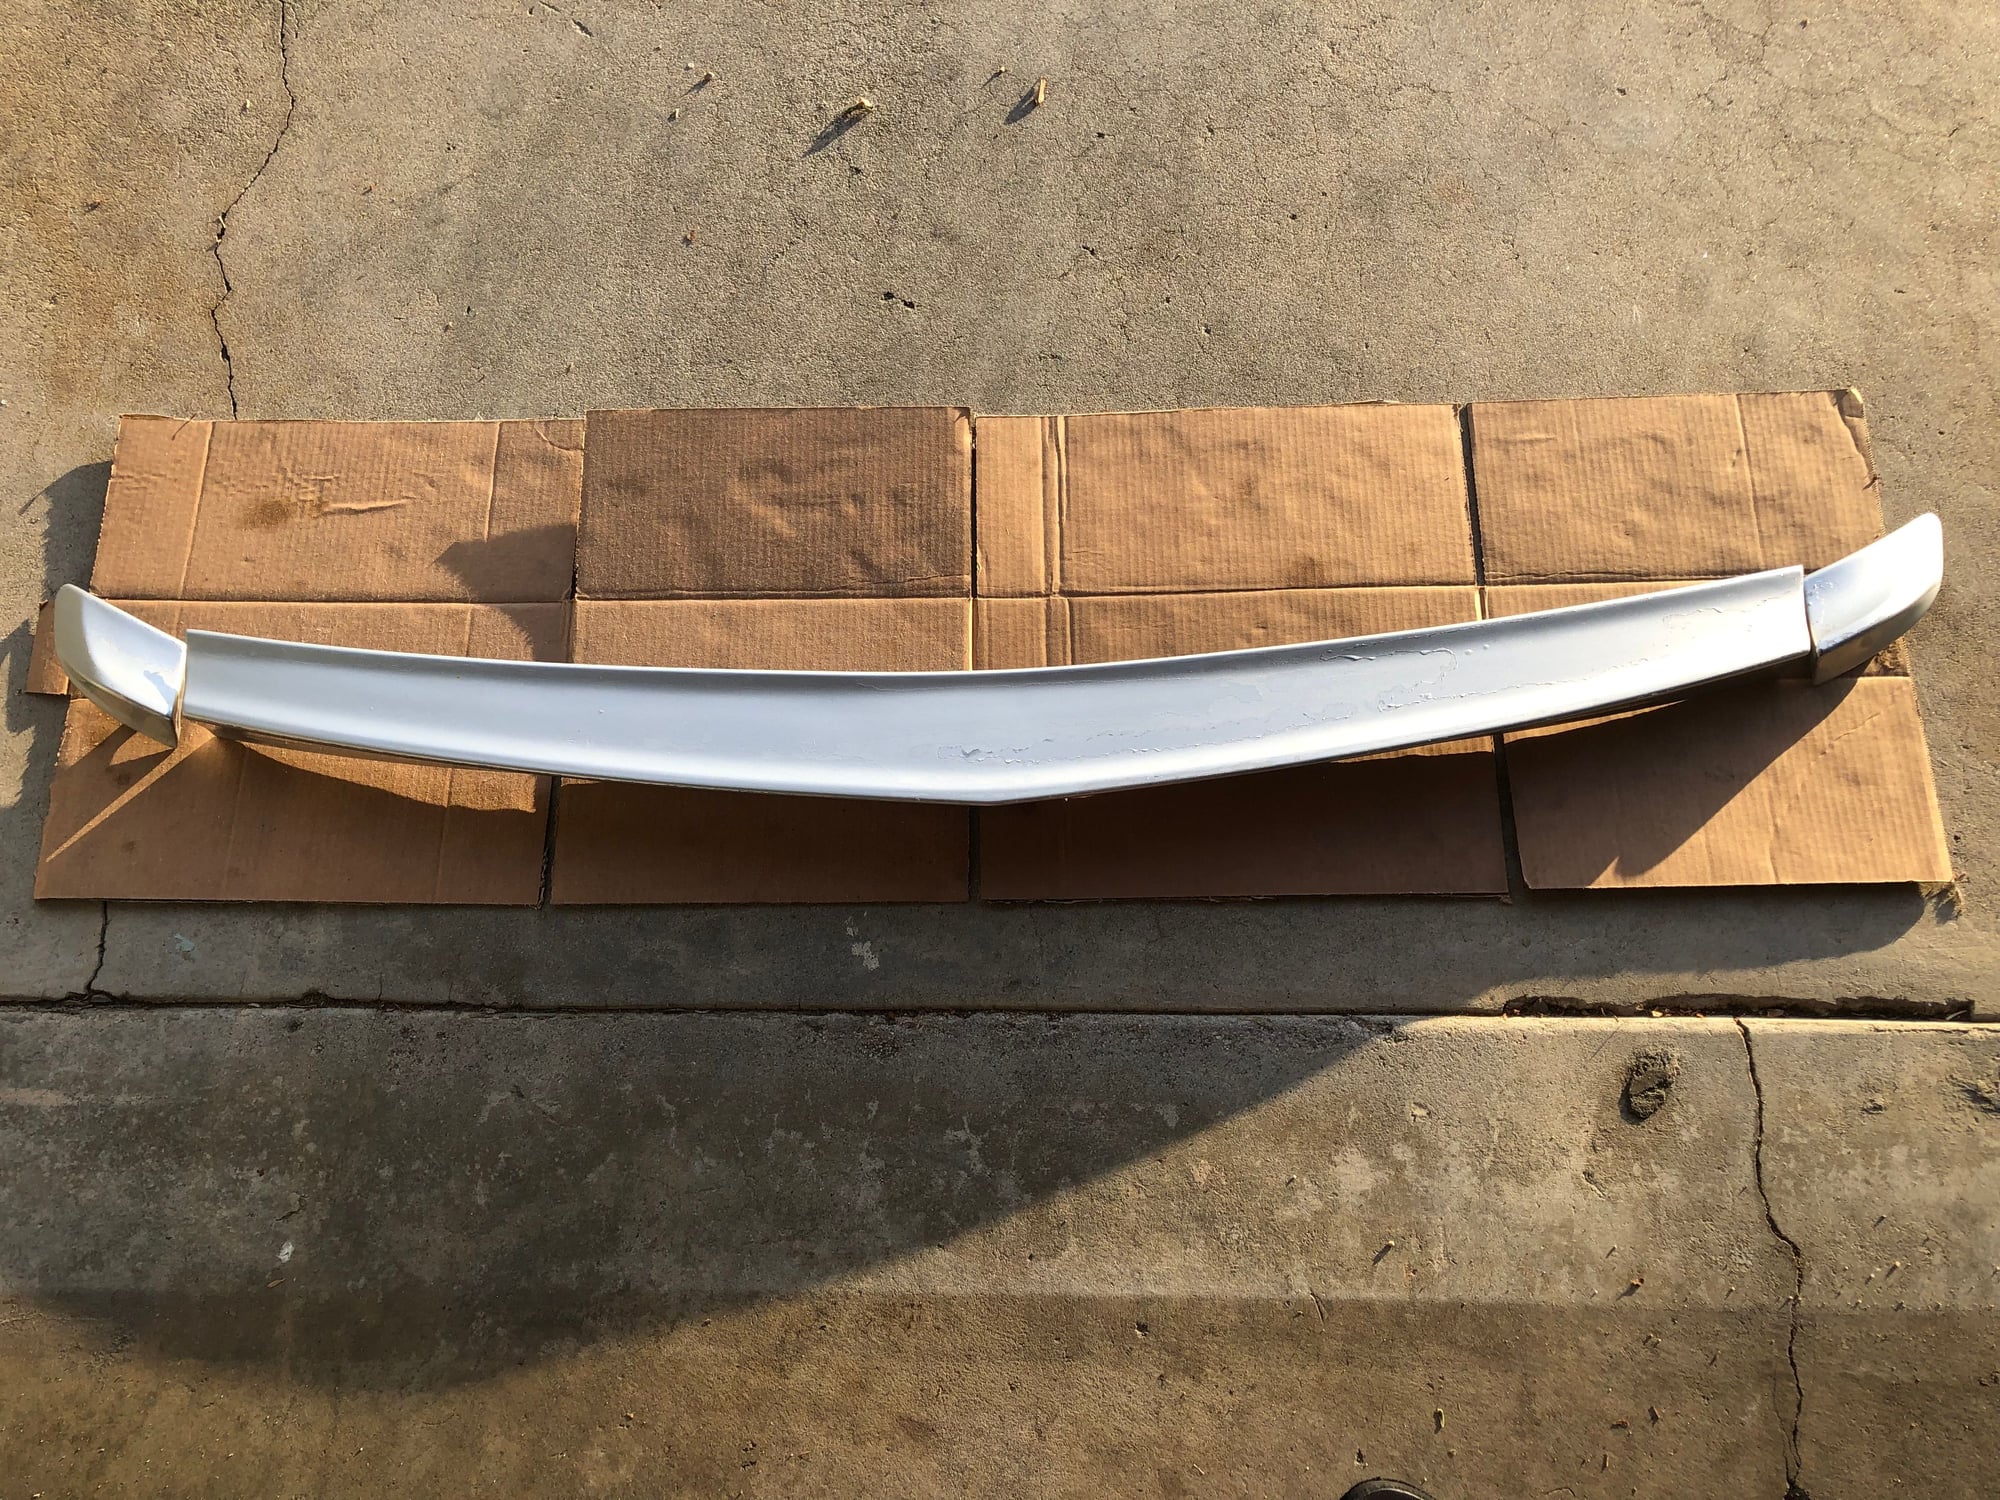 Exterior Body Parts - FS: 2G TL Mugen Spoiler and Honda Inspire Parts - Used - 1999 to 2003 Acura TL - Burbank, CA 91504, United States